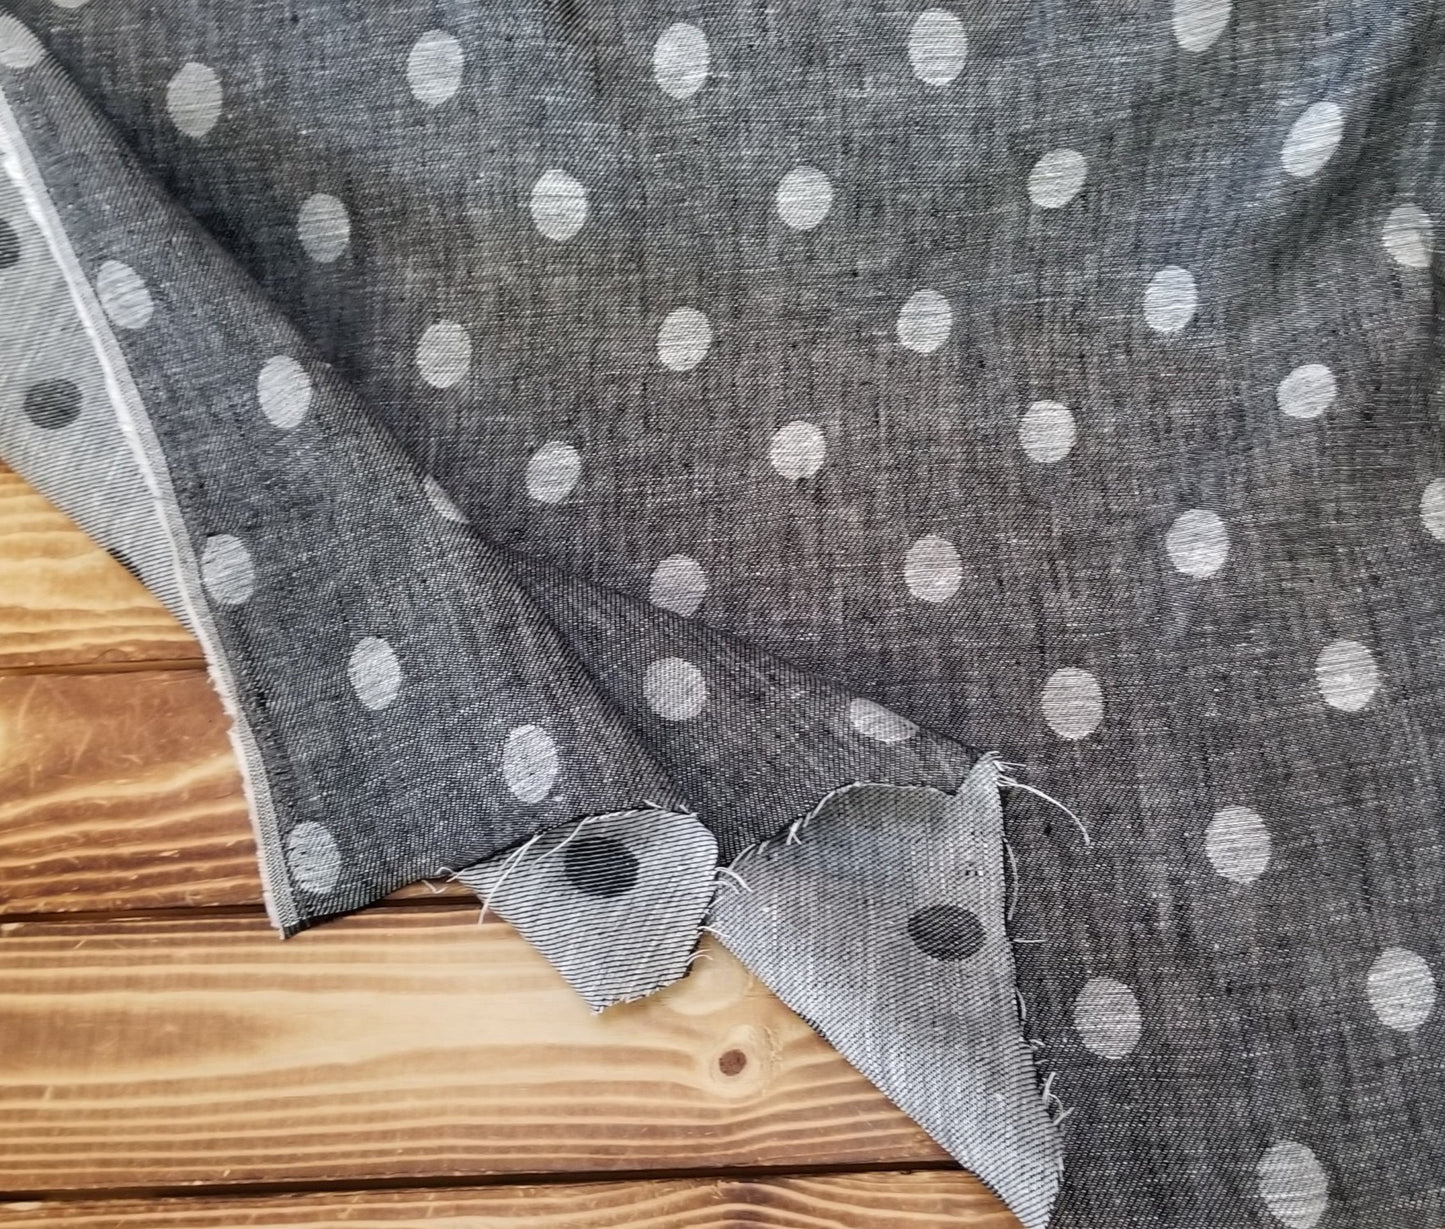 Designer Deadstock Linen Reversible Dots Black and Ivory Jacquard Woven-by the yard